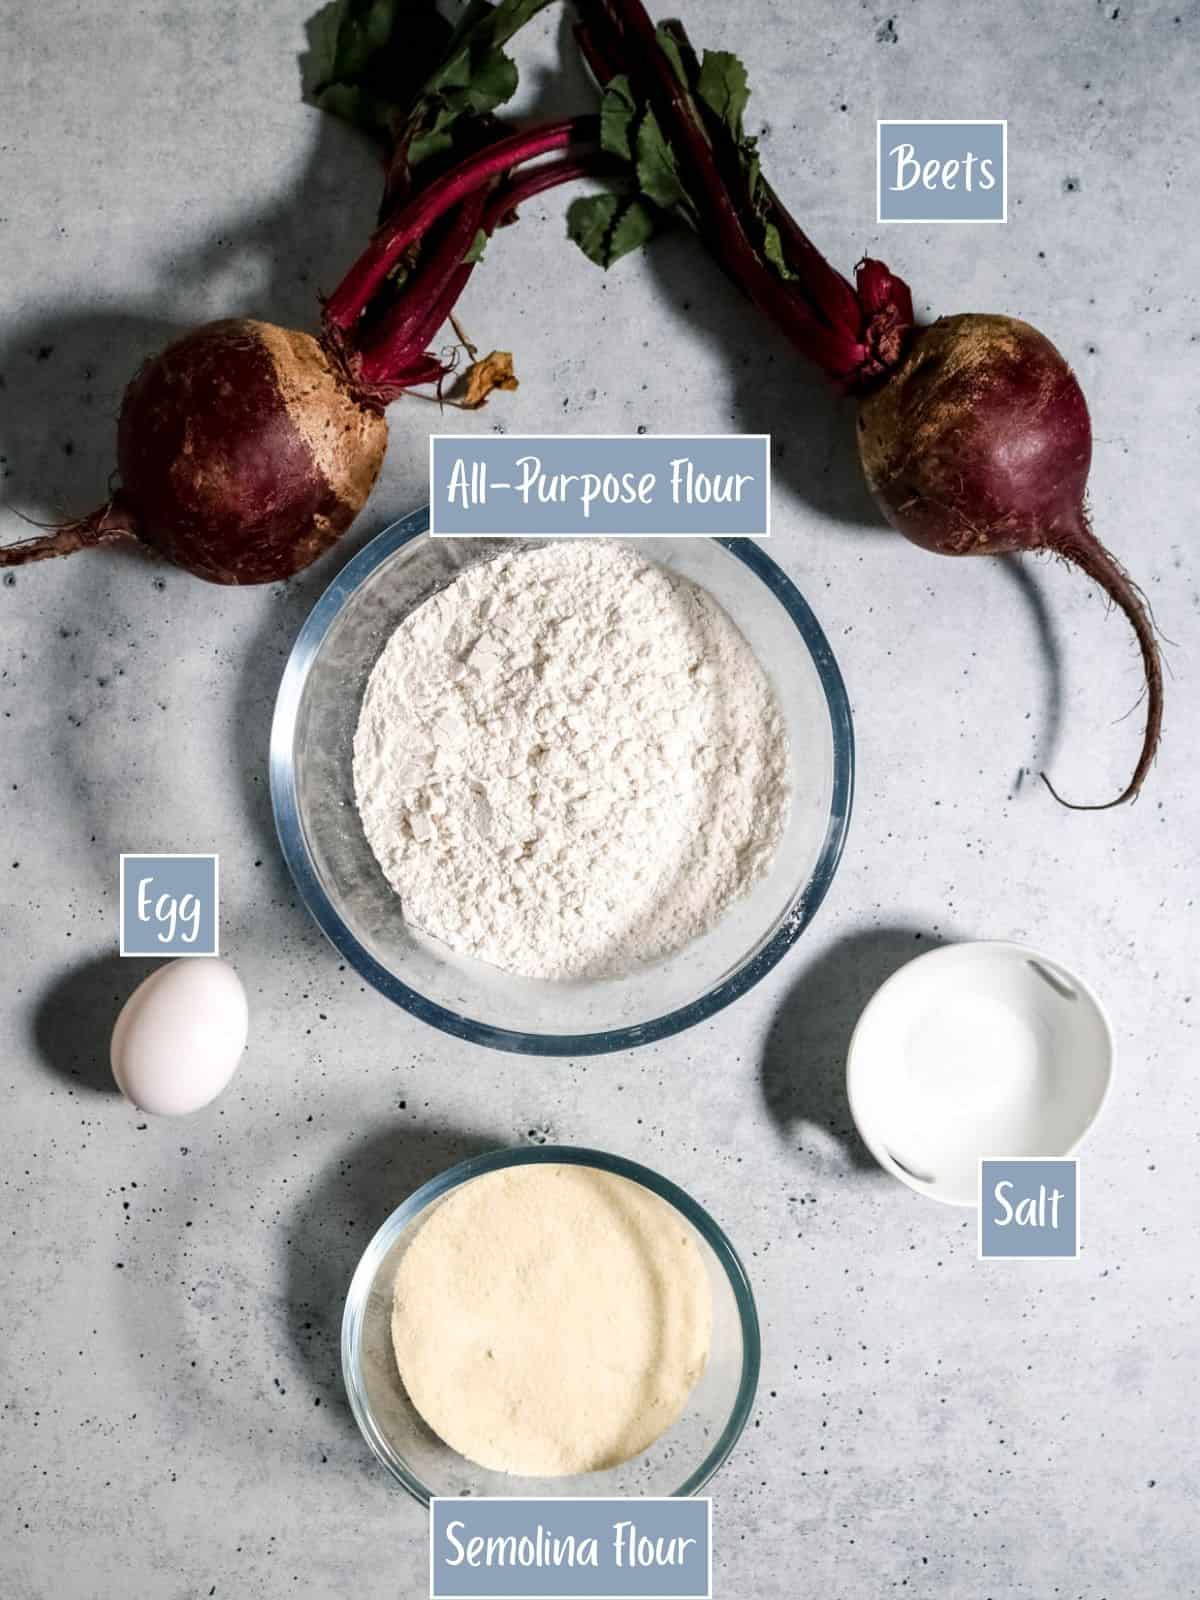 Labeled photo of the ingredients to make beetroot ravioli dough.